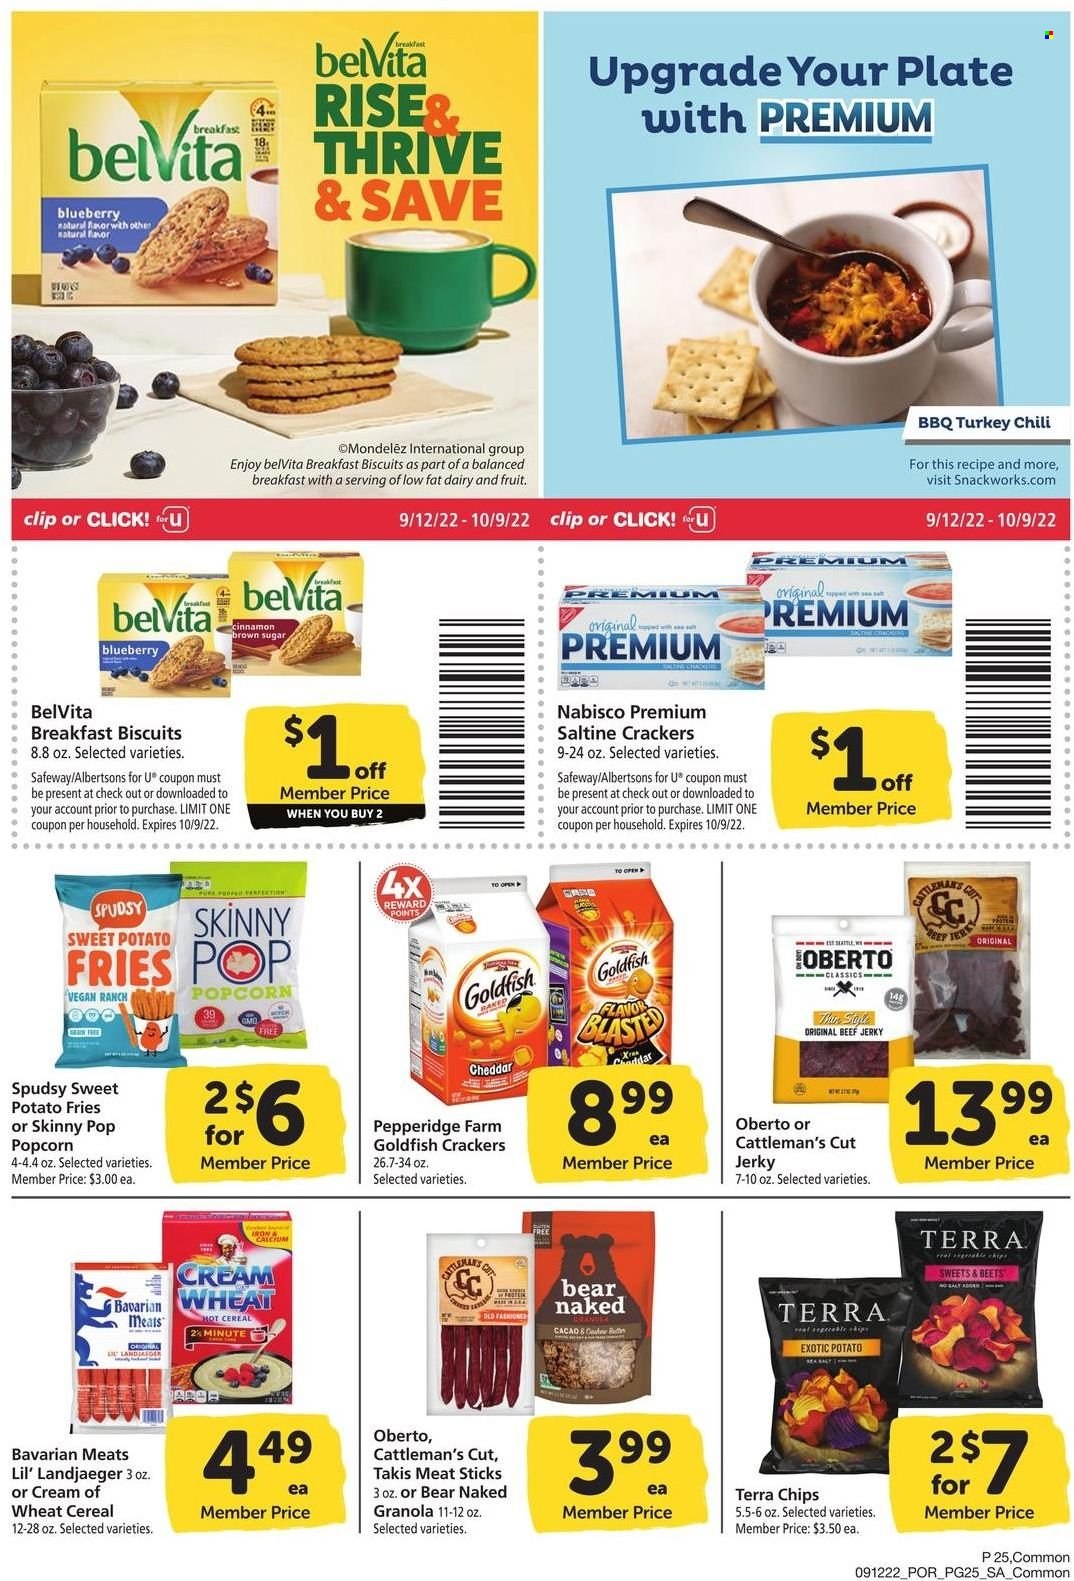 thumbnail - Safeway Flyer - 09/12/2022 - 10/09/2022 - Sales products - sweet potato, beef jerky, jerky, cheese, sweet potato fries, crackers, biscuit, chips, popcorn, Goldfish, Skinny Pop, cane sugar, cereals, Cream of Wheat, granola, belVita, cinnamon, plate. Page 25.